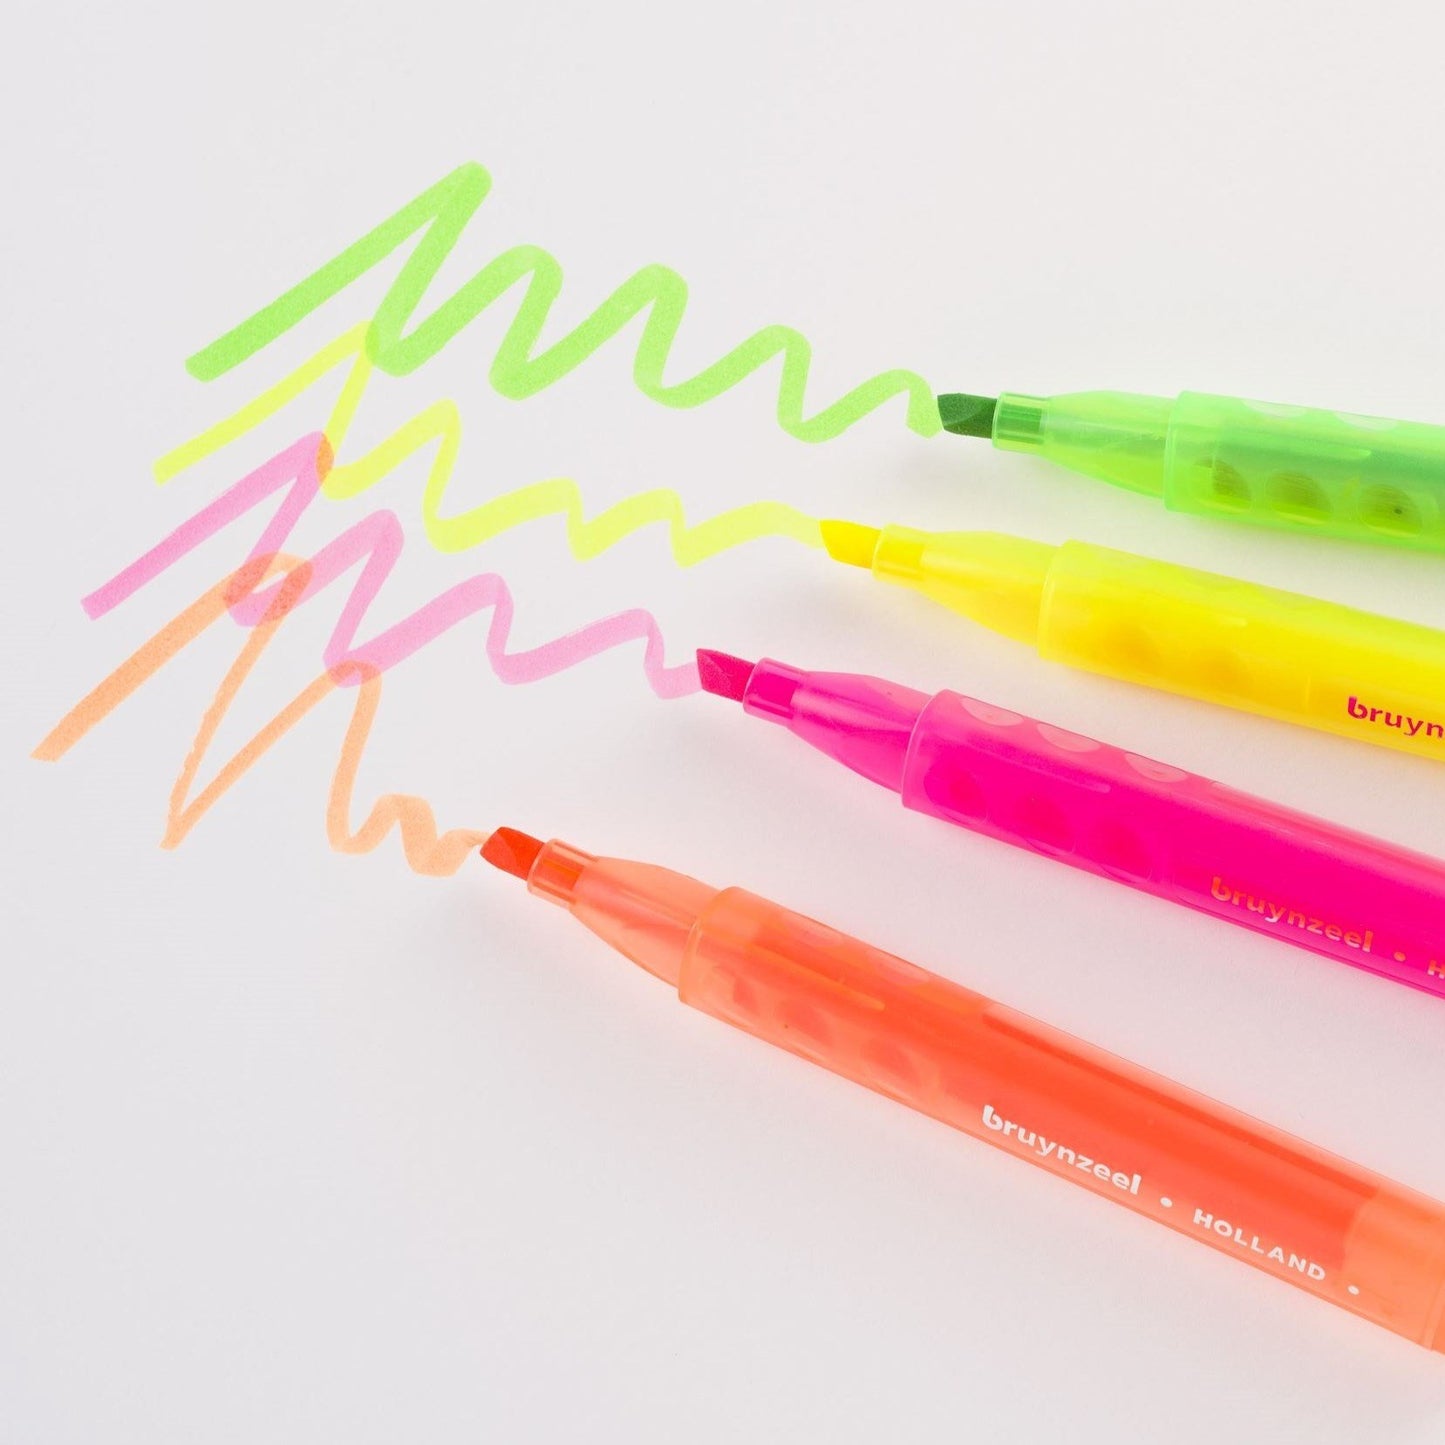 Bruynzeel College Neon Highlighter Pens 4 pack swatches - Paper Dream